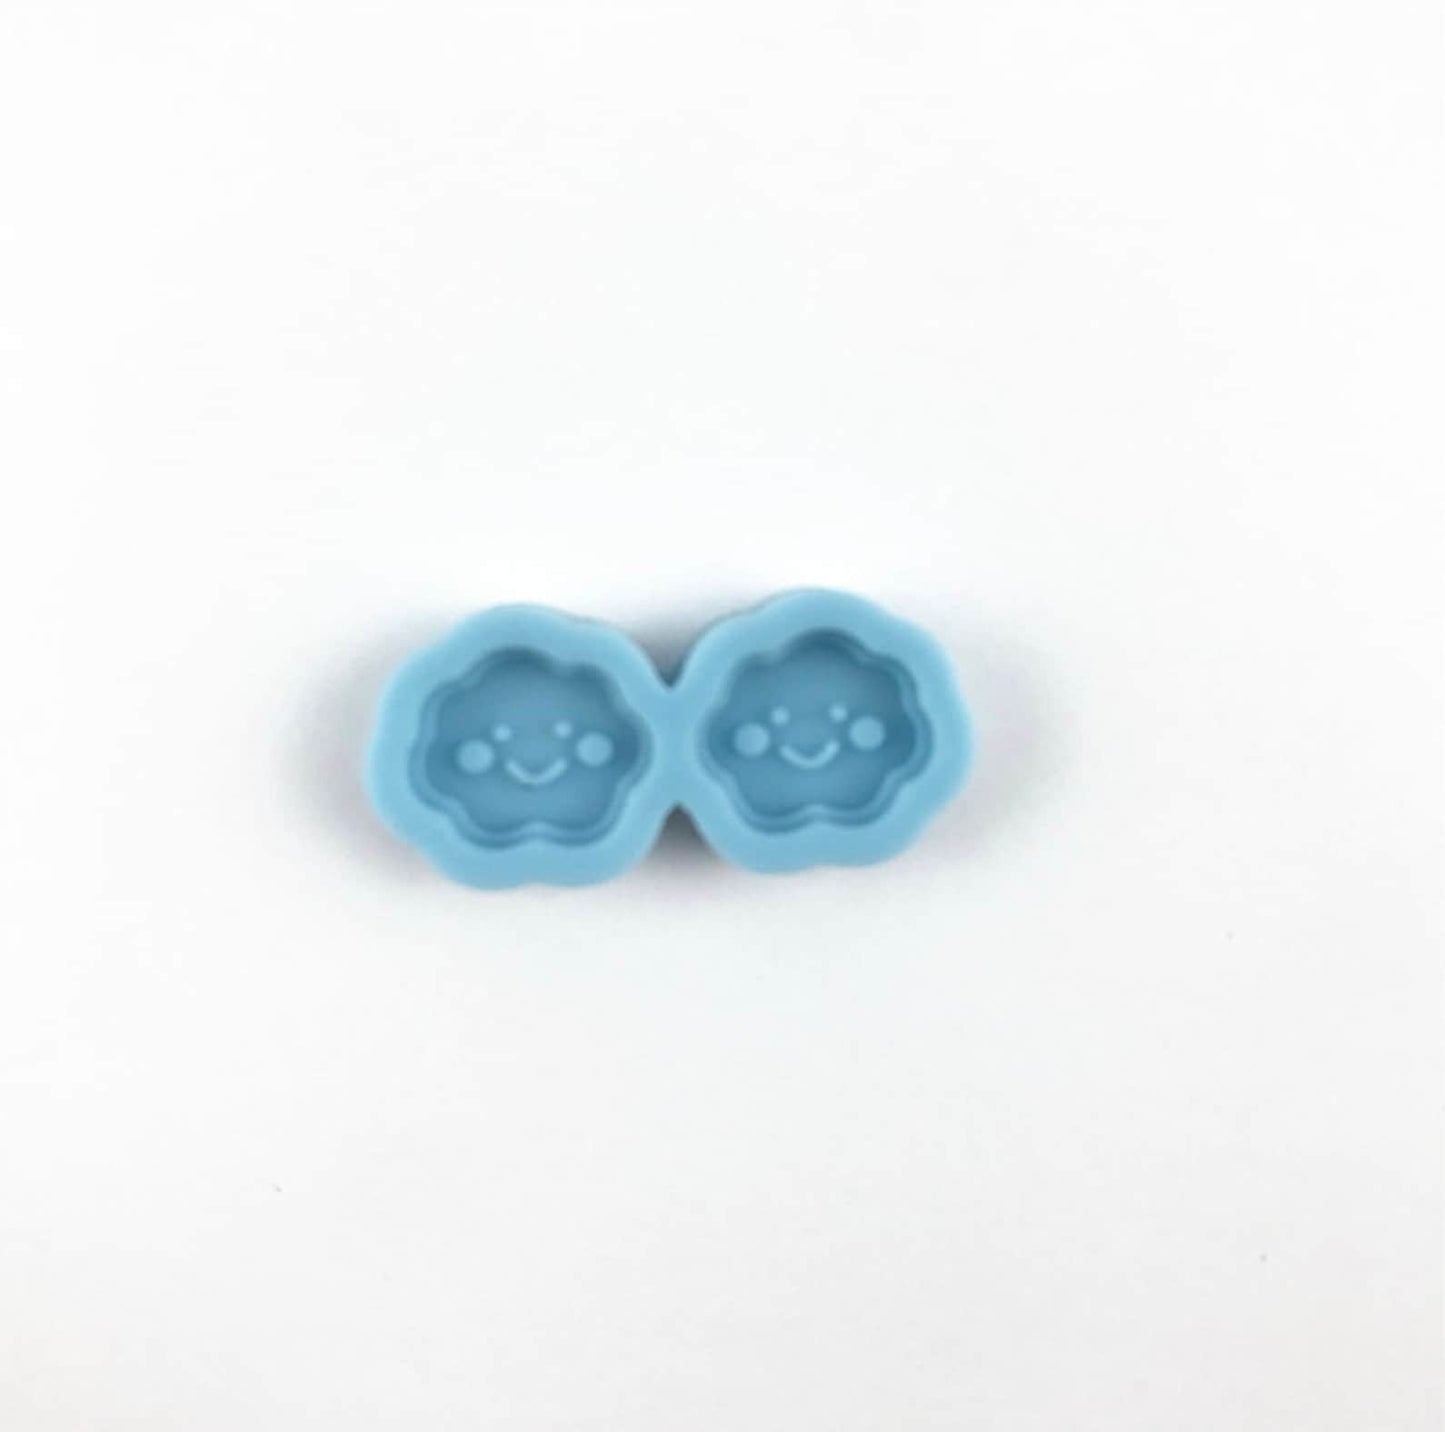 12MM Happy Cloud Themed Silicone Earring Molds